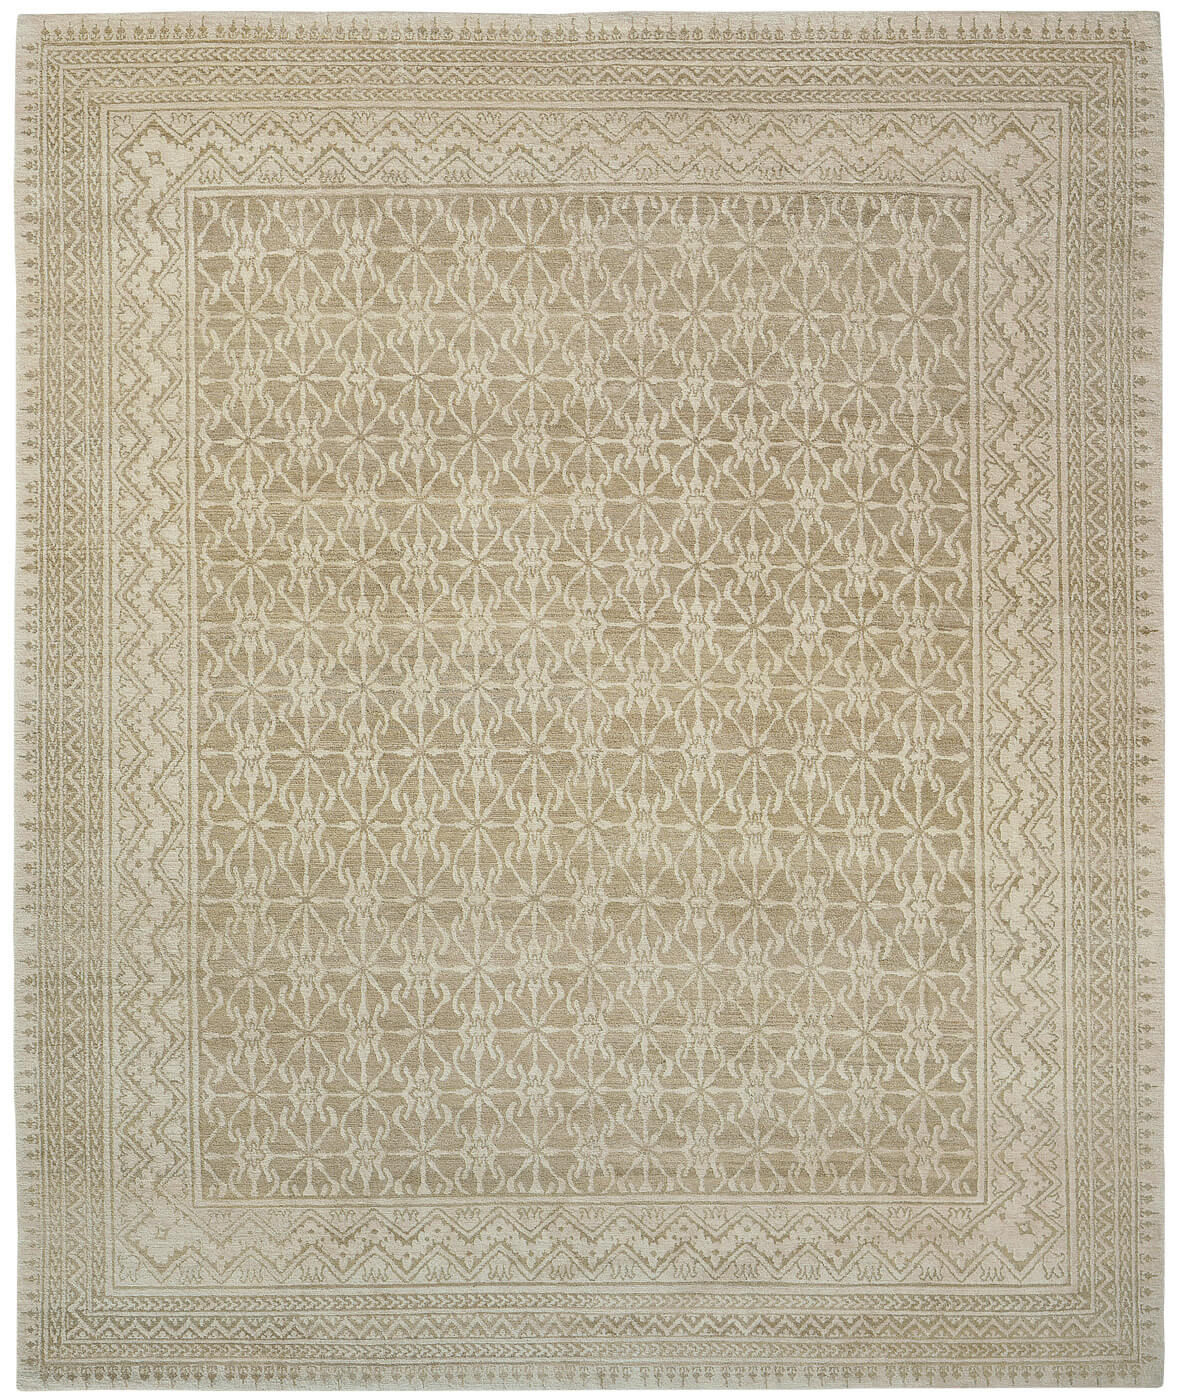 Blueberry Luxury Hand-woven Rug ☞ Size: 200 x 300 cm